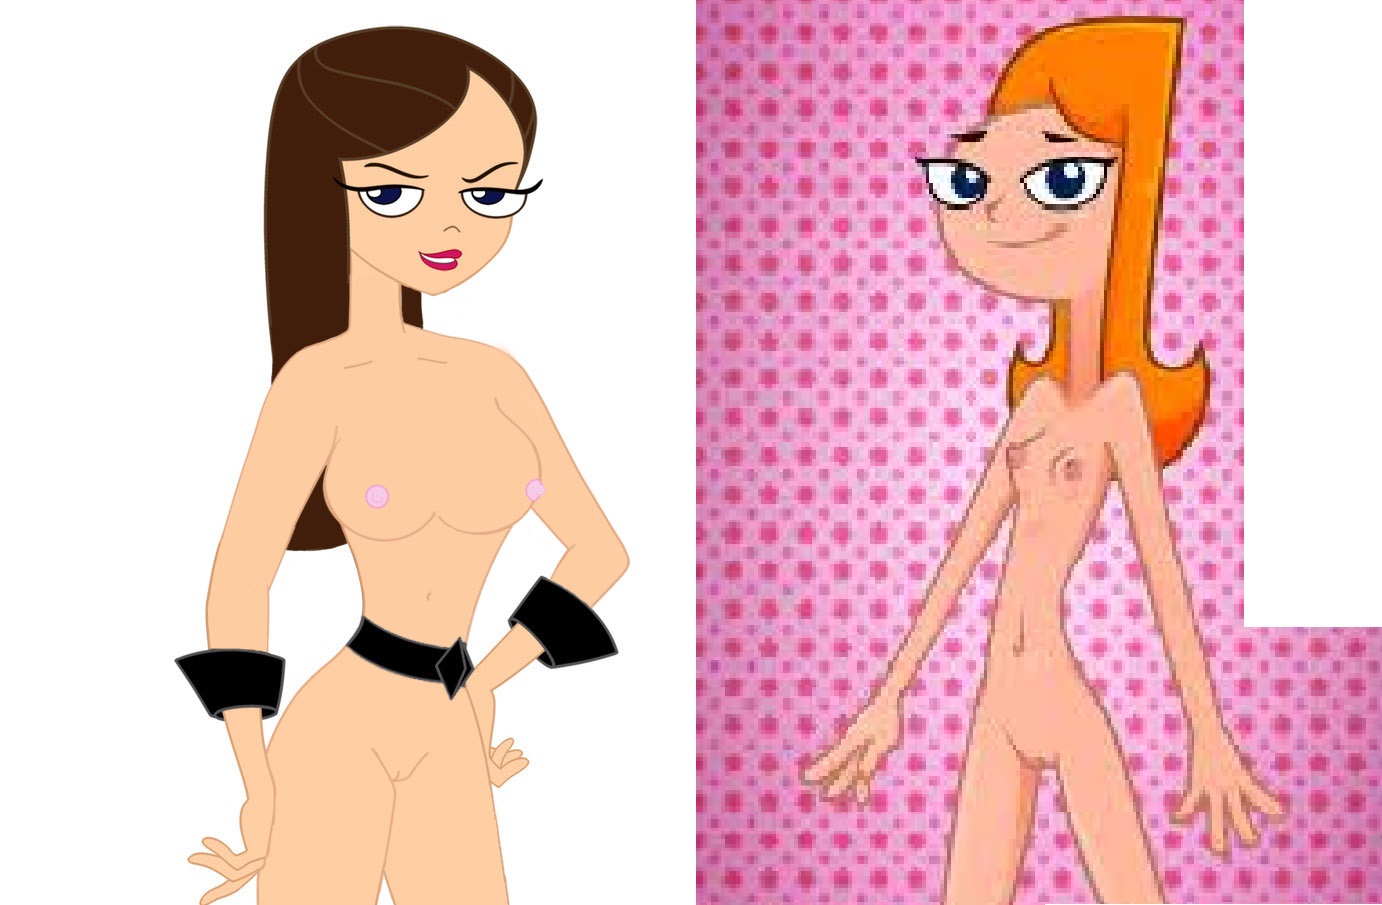 Rule 34 phineas and ferb